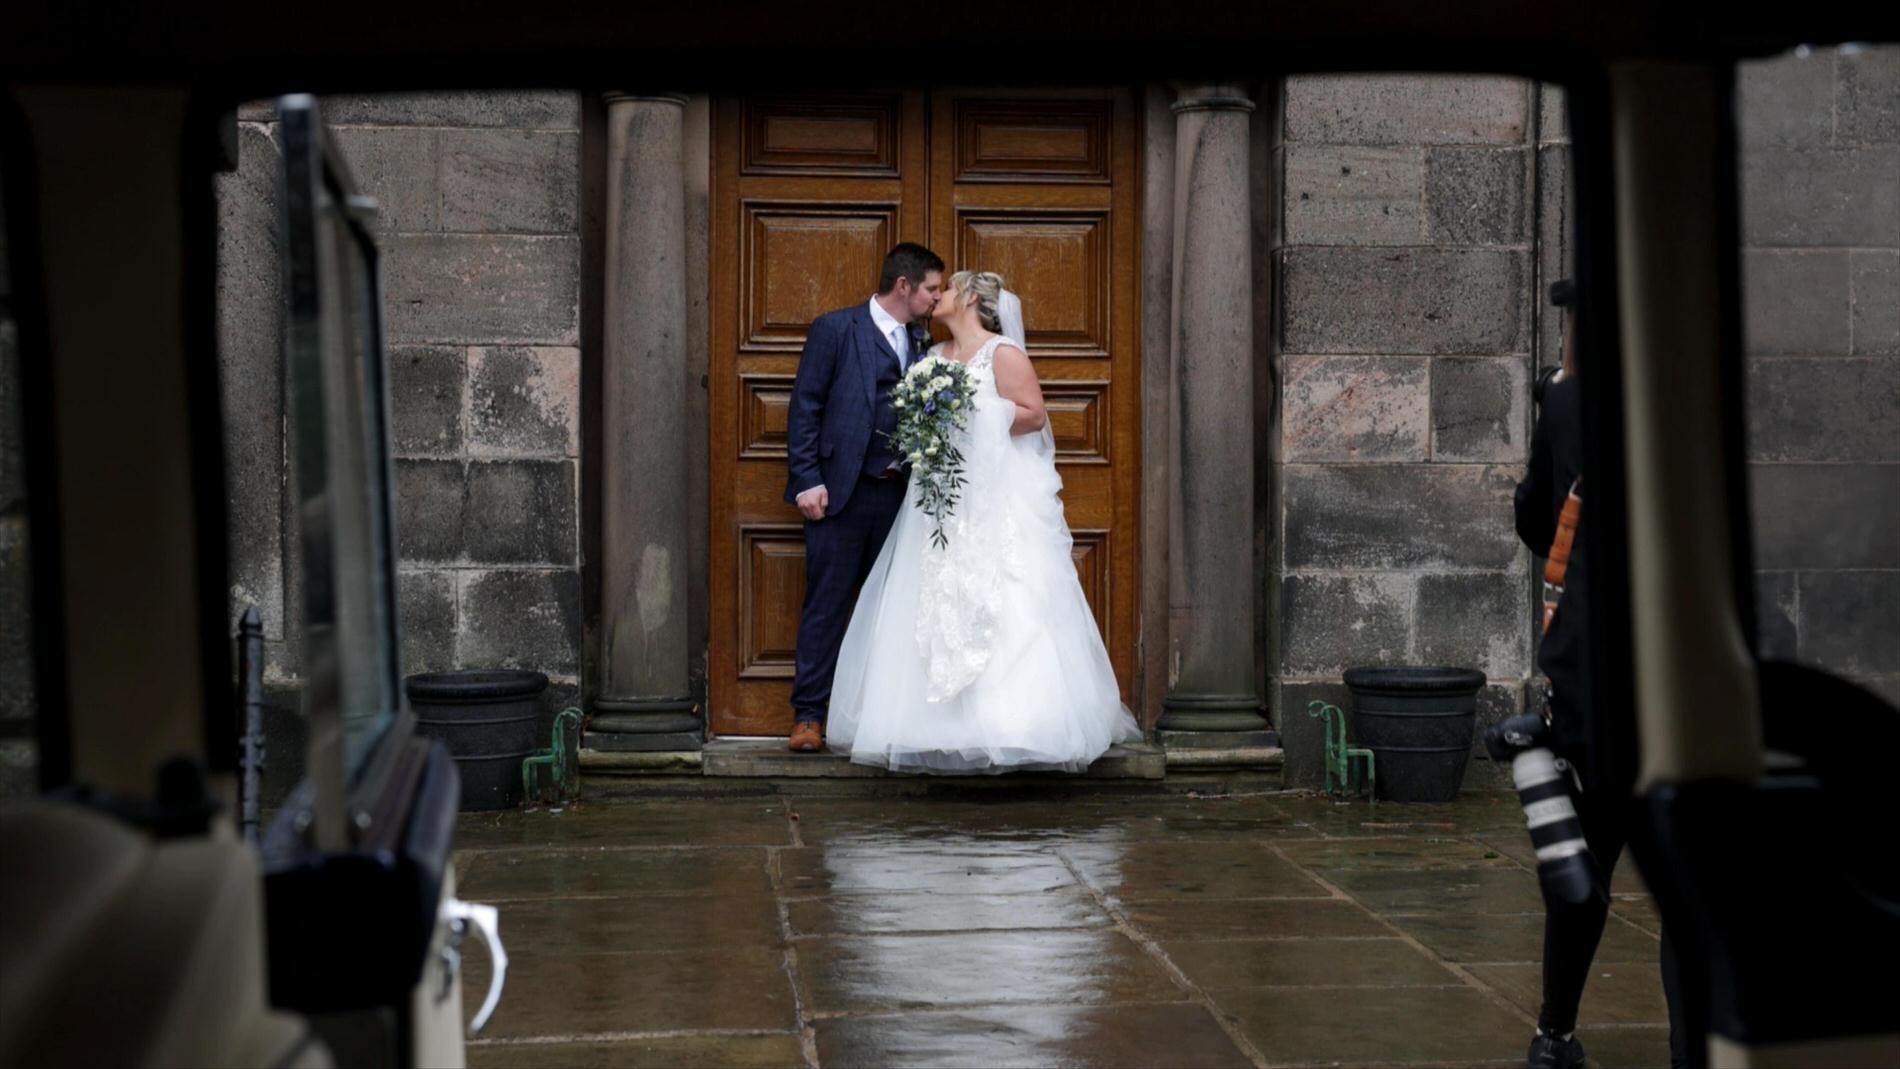 the videographer films through the wedding car window as the couple kiss outside St gregory's church